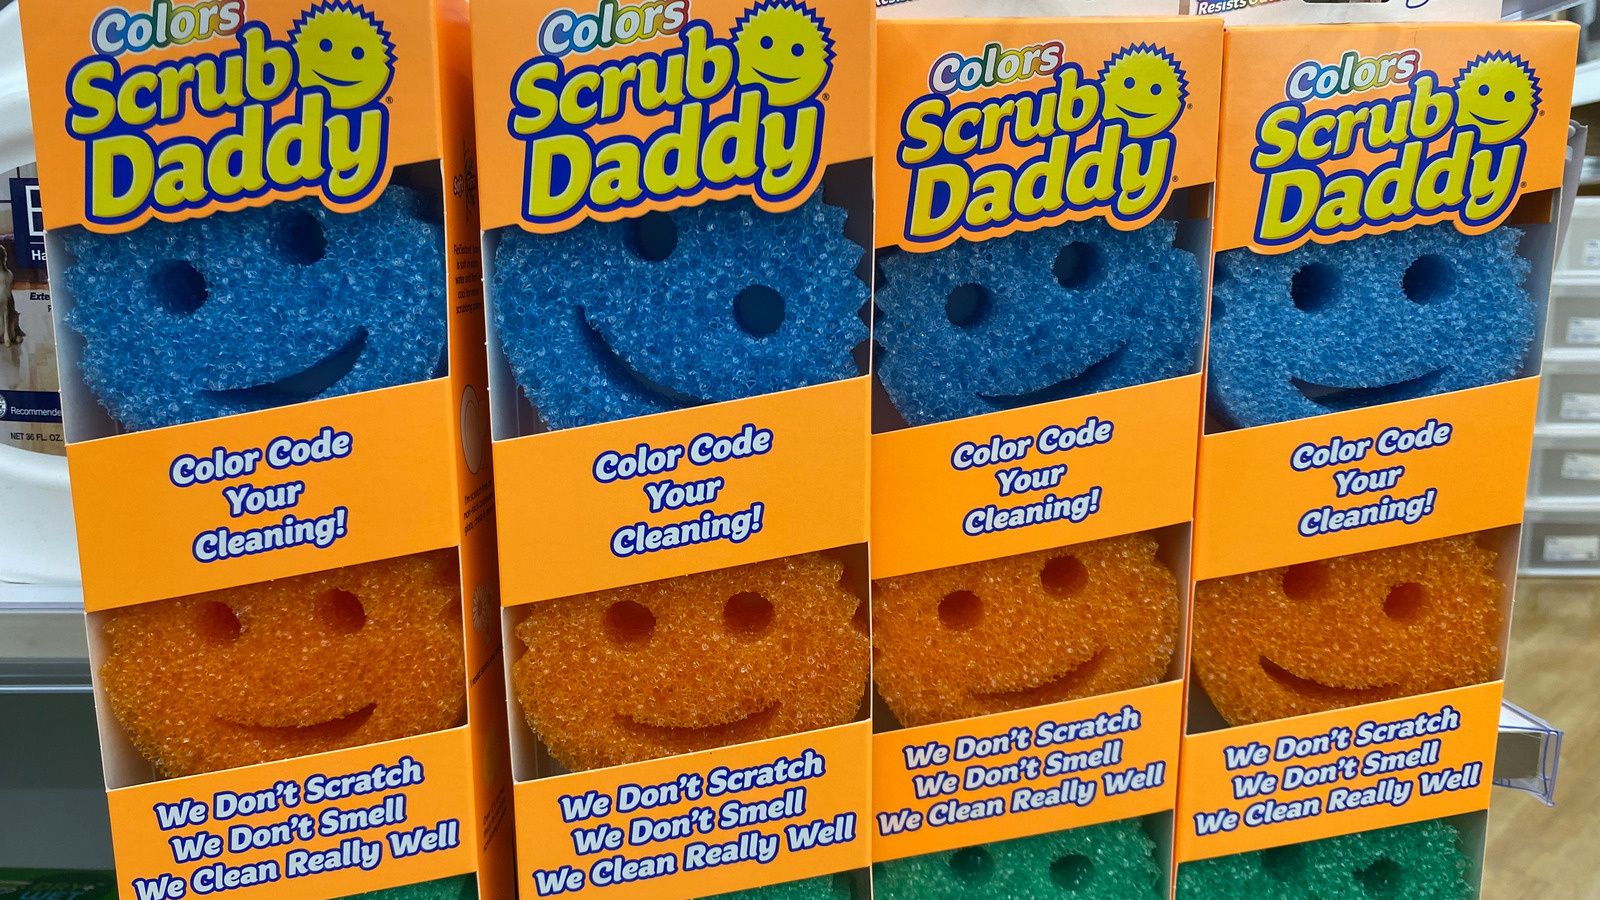 https://www.housedigest.com/img/gallery/how-to-choose-the-right-scrub-daddy-for-your-cleaning-needs/l-intro-1687967432.jpg